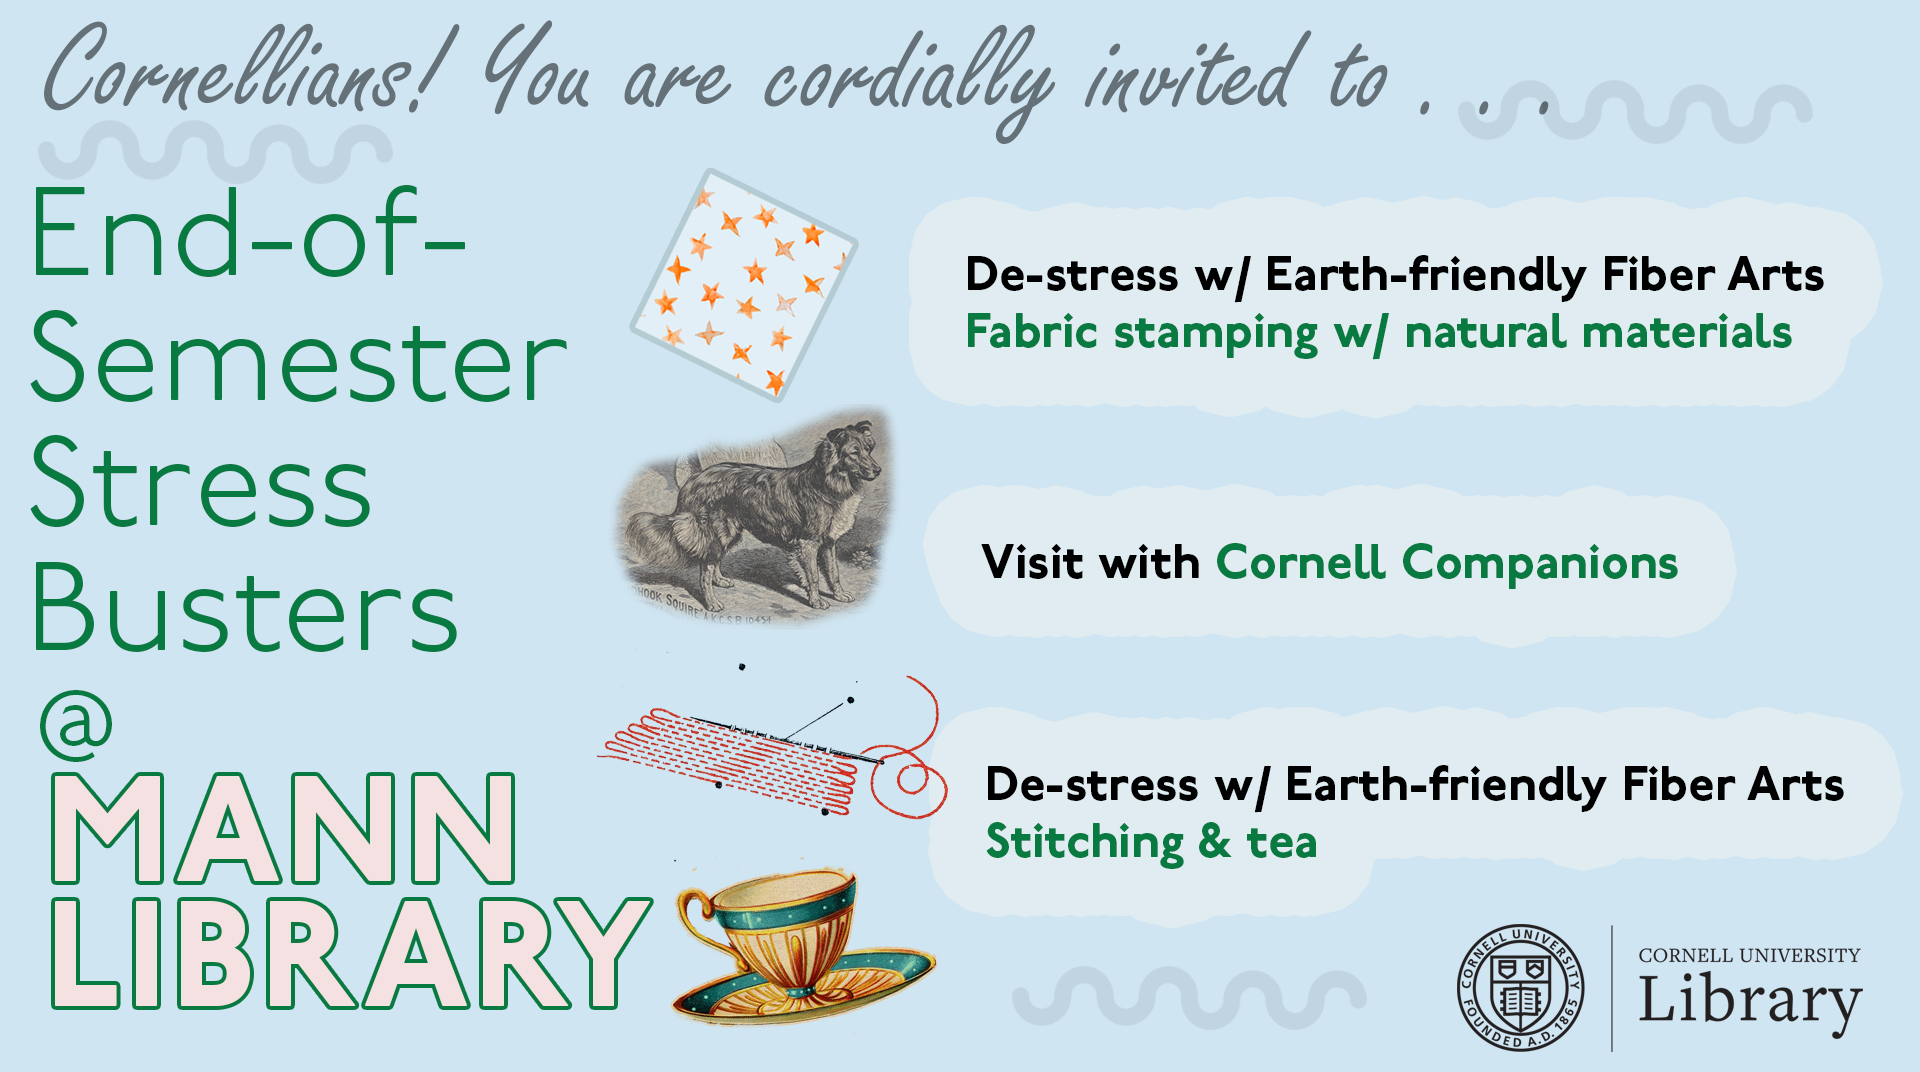 Images of fabric, dogs, stitching, and tea, with text:: Cornellians! You are cordially invited to...End-of-Semester stressbusters @ Mann Library; De-stress w/ Earth-Friendly Fiber Arts, Fabric stamping w/ natural materials; Visit with Cornell Companions; De-stress w/ Earth-friendly Fiber Arts, Stitching & tea